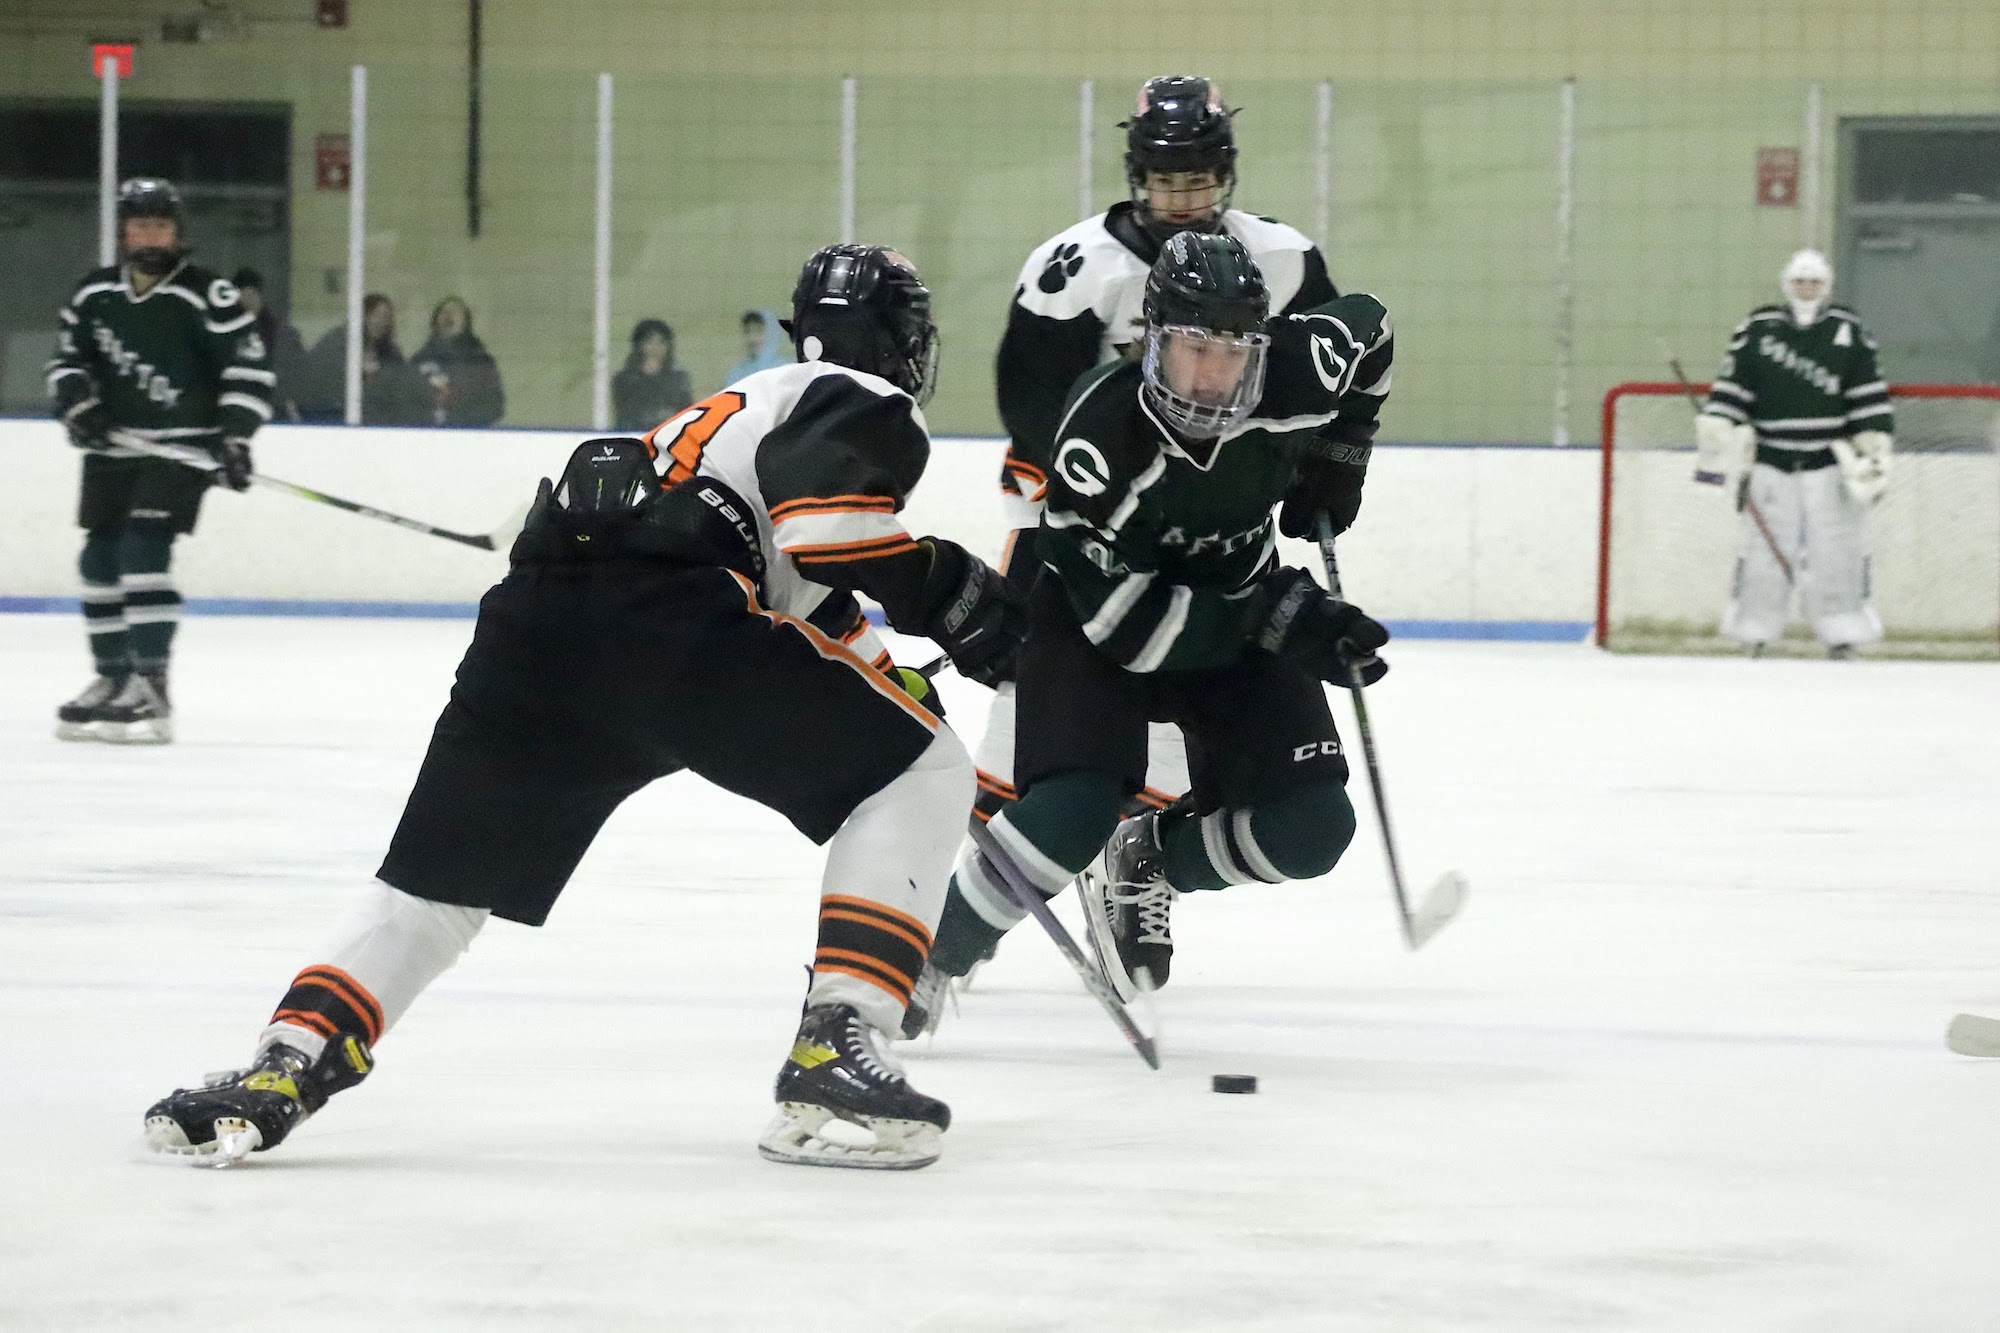 &#8216;A well-earned win&#8217;: Grafton hockey tops Marlborough in low-scoring matchup